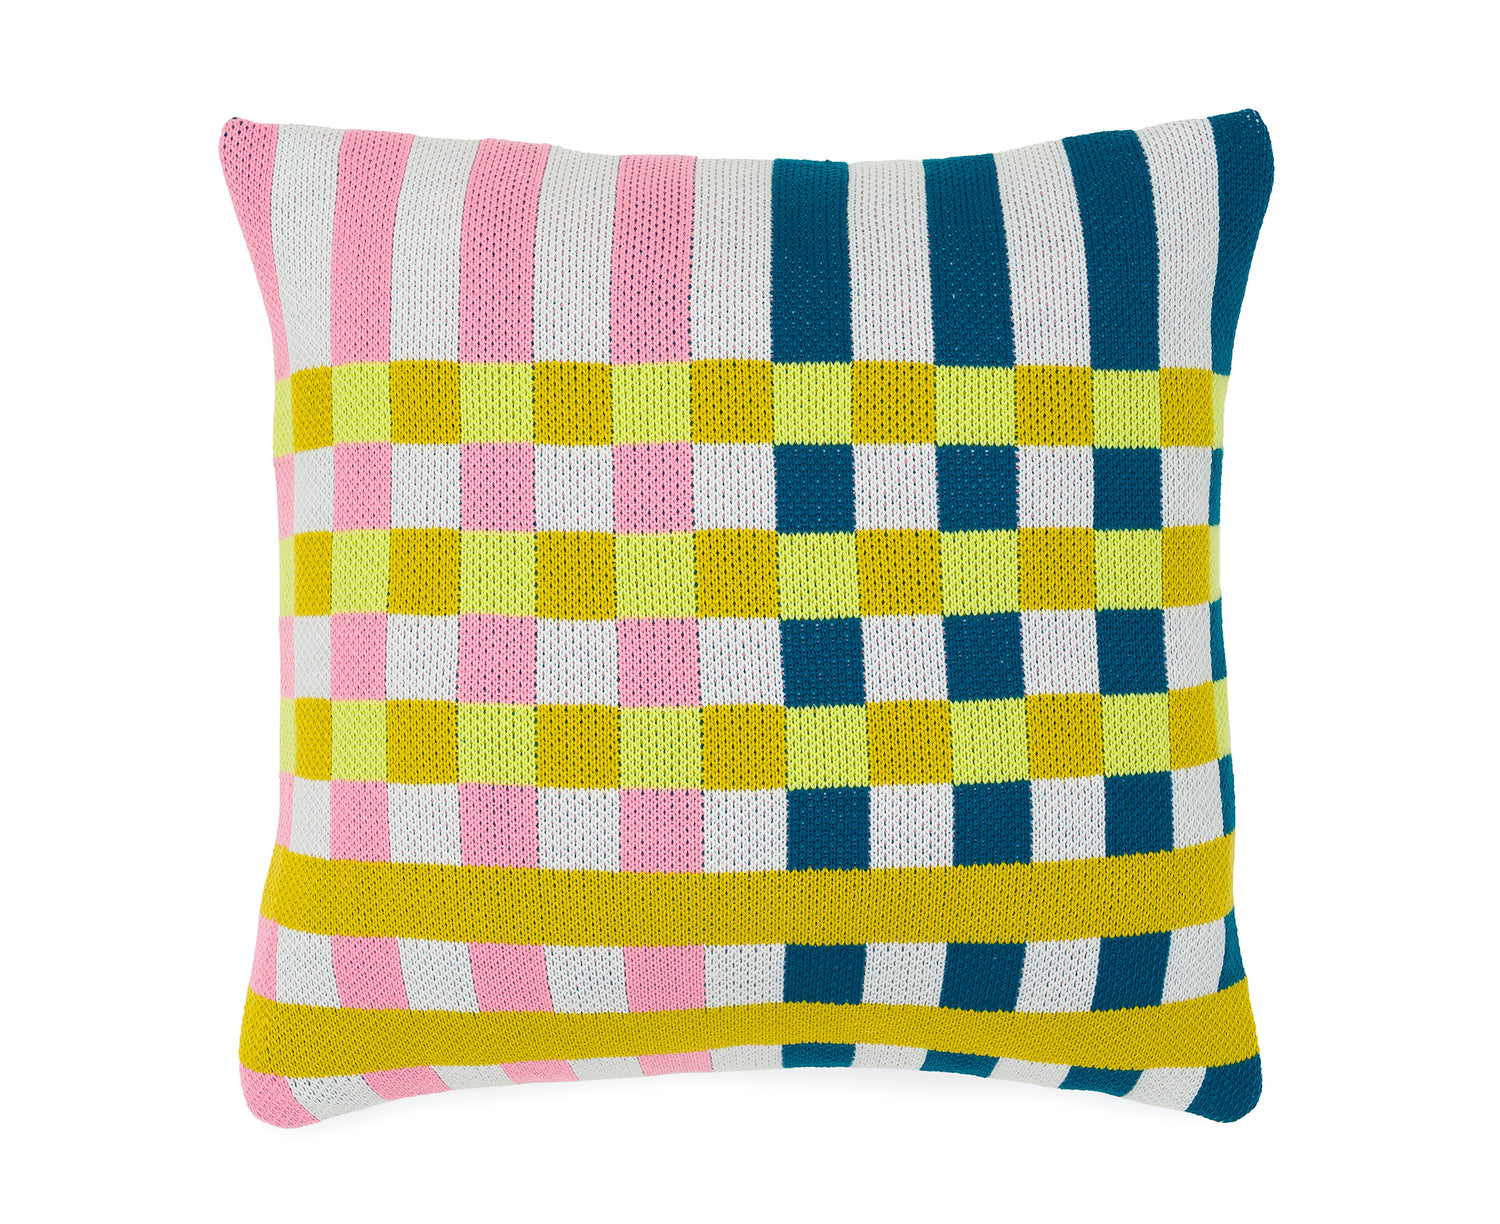 Square Square Pillow in Green and Pink by Verloop